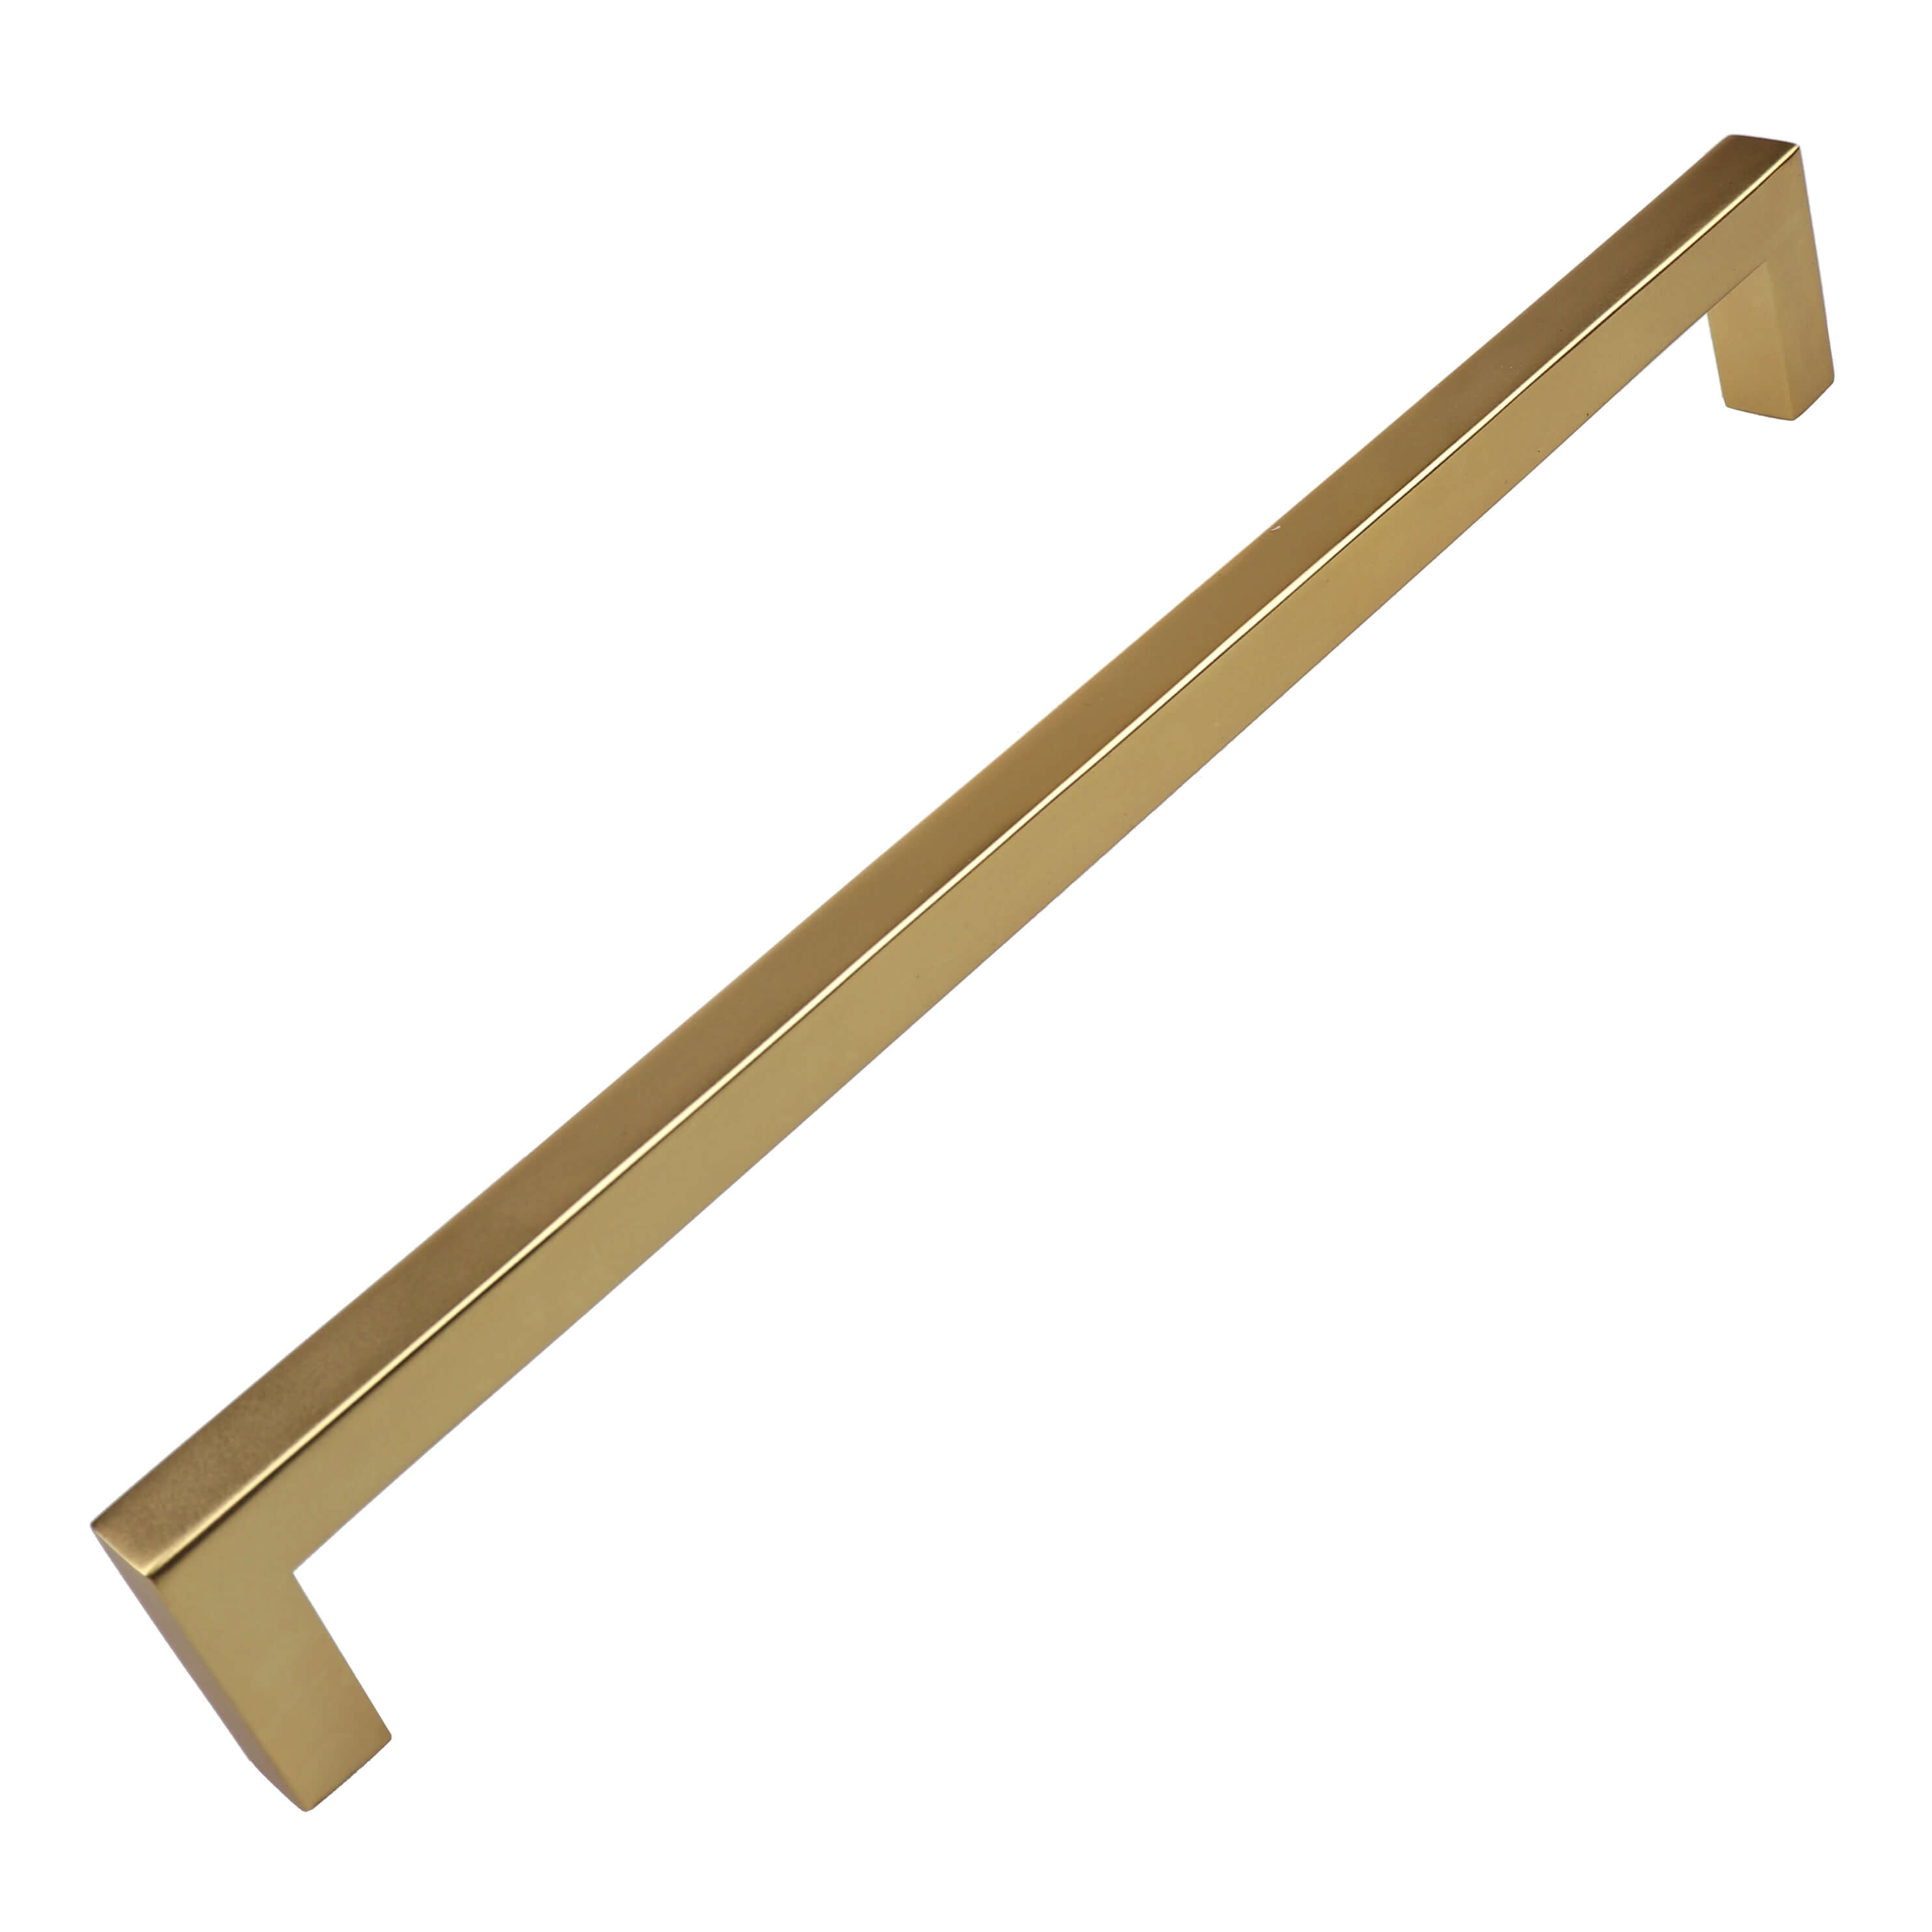 GlideRite 8-3/4 in. Center Solid Square Bar Cabinet Pulls, Brass Gold, Pack of 25 - image 1 of 3